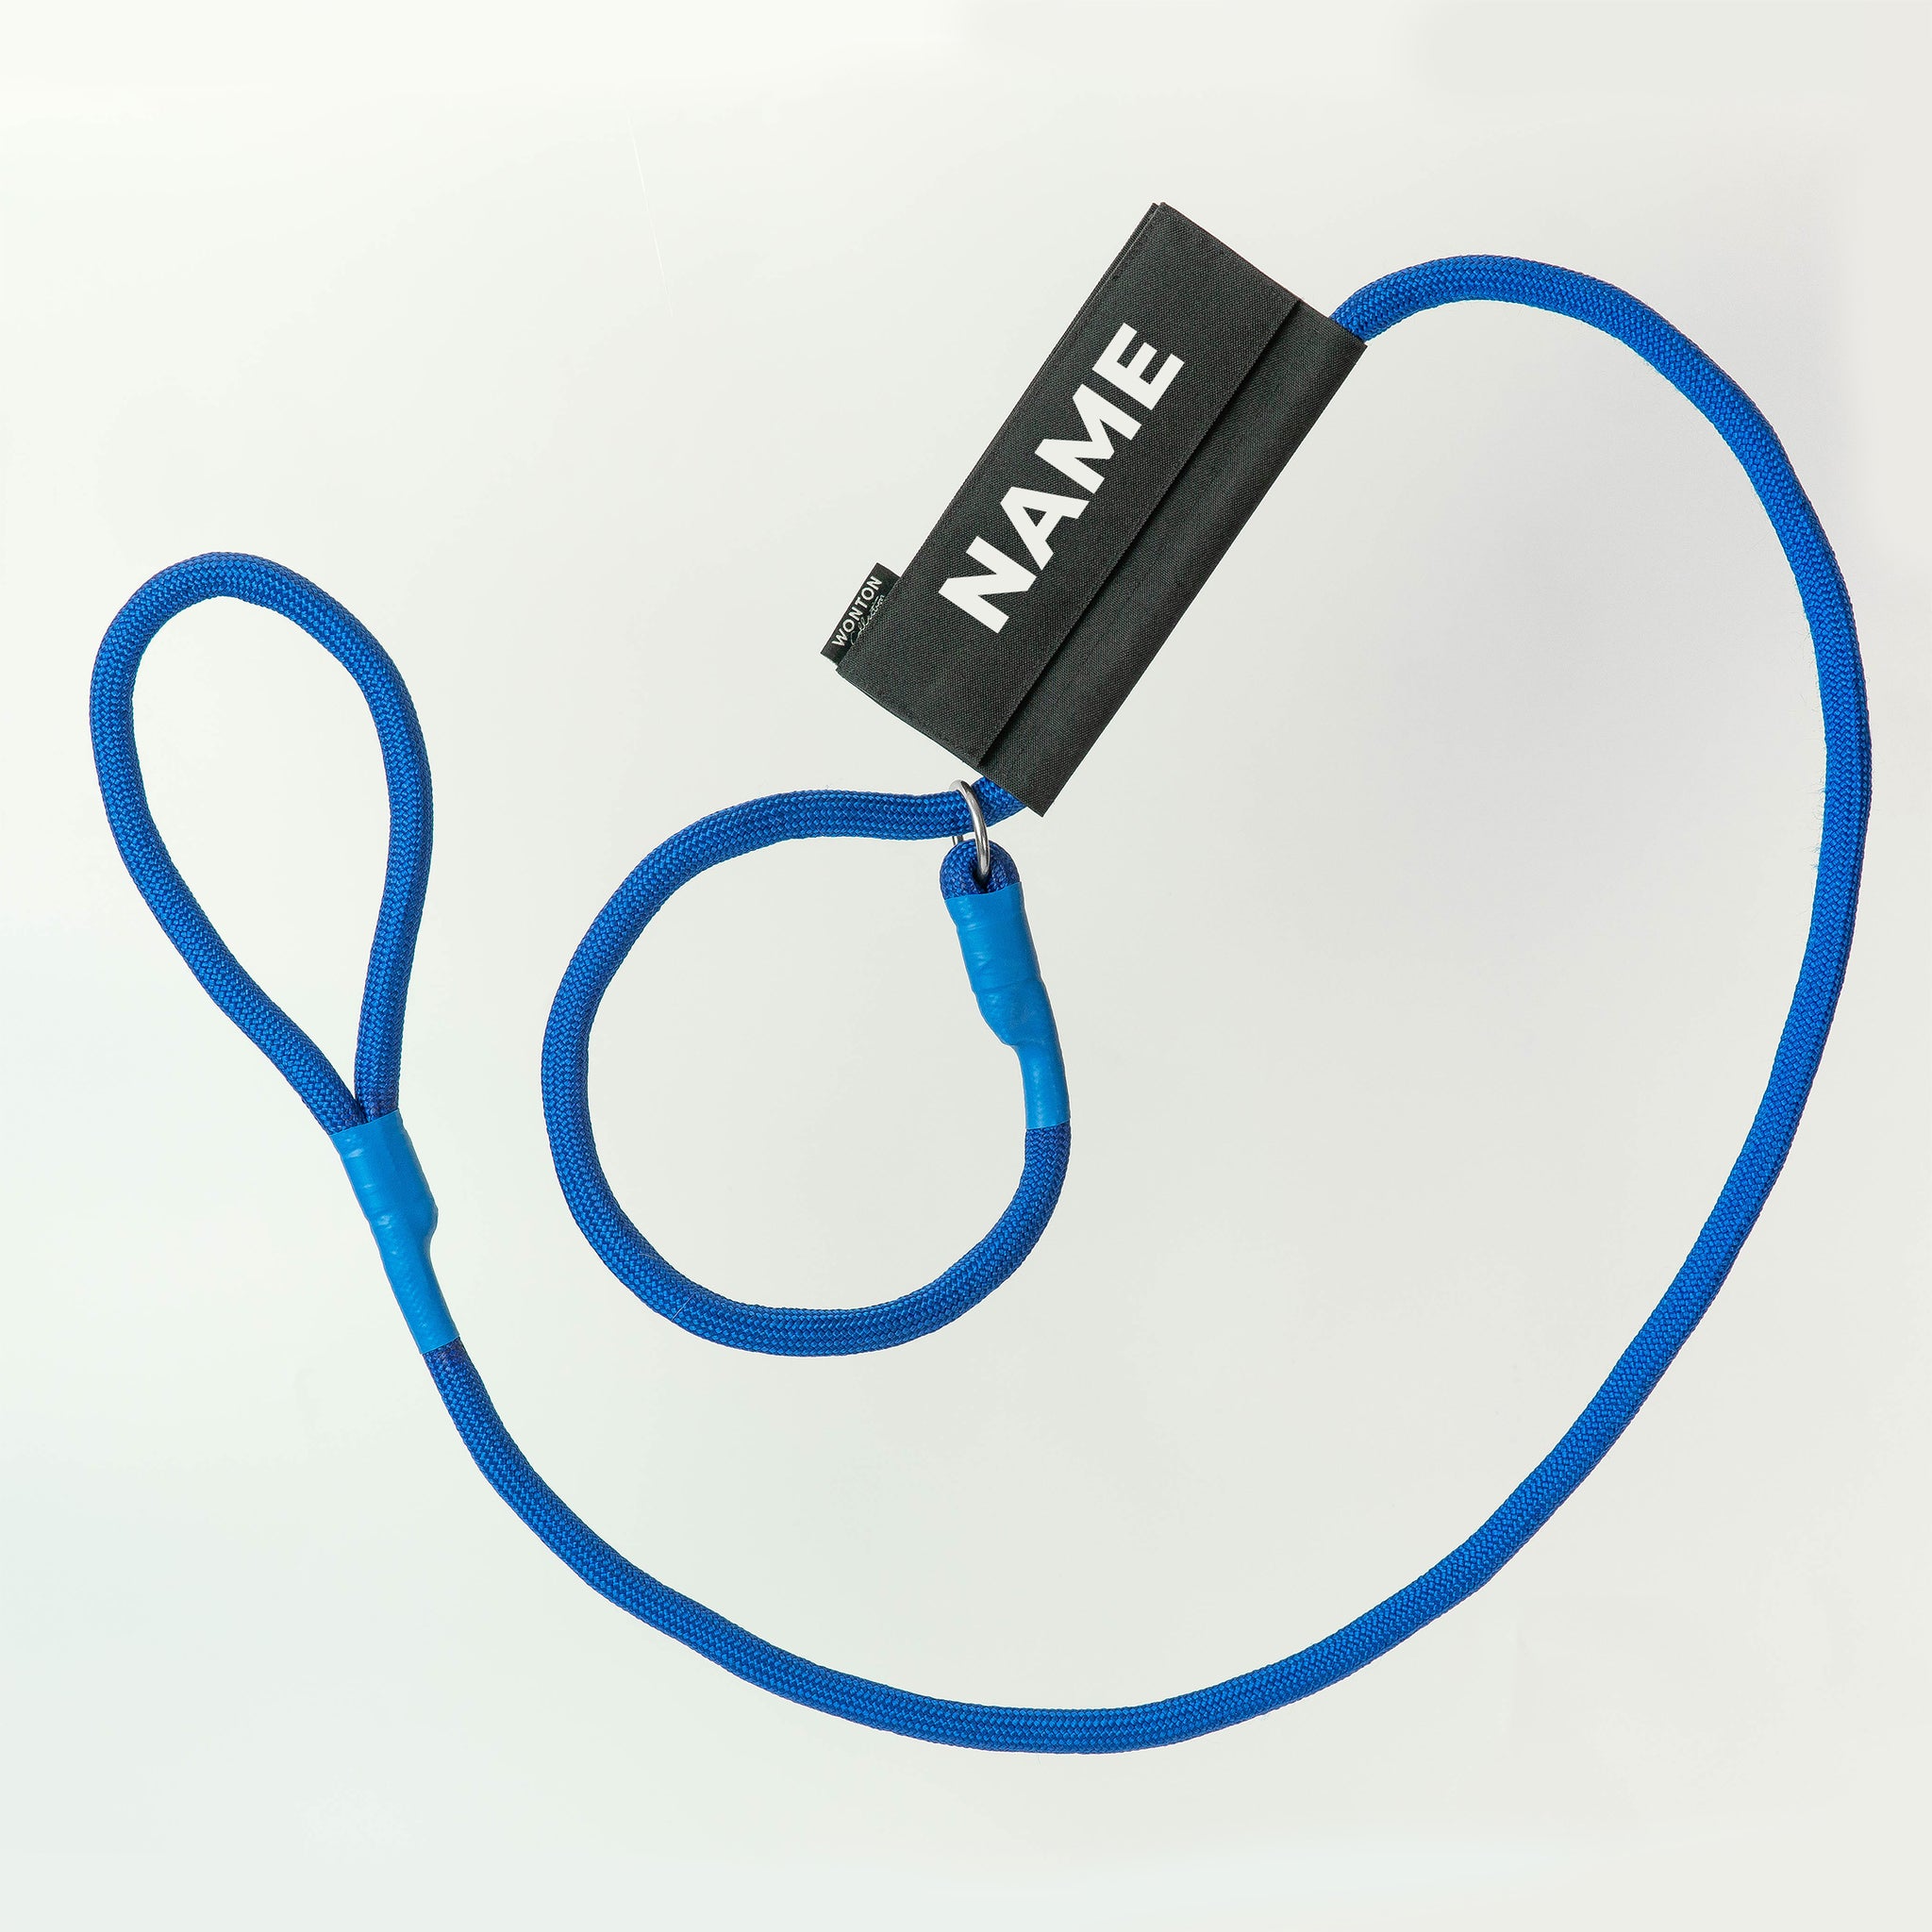 WONTON Slip Leash with name tag in skyblue